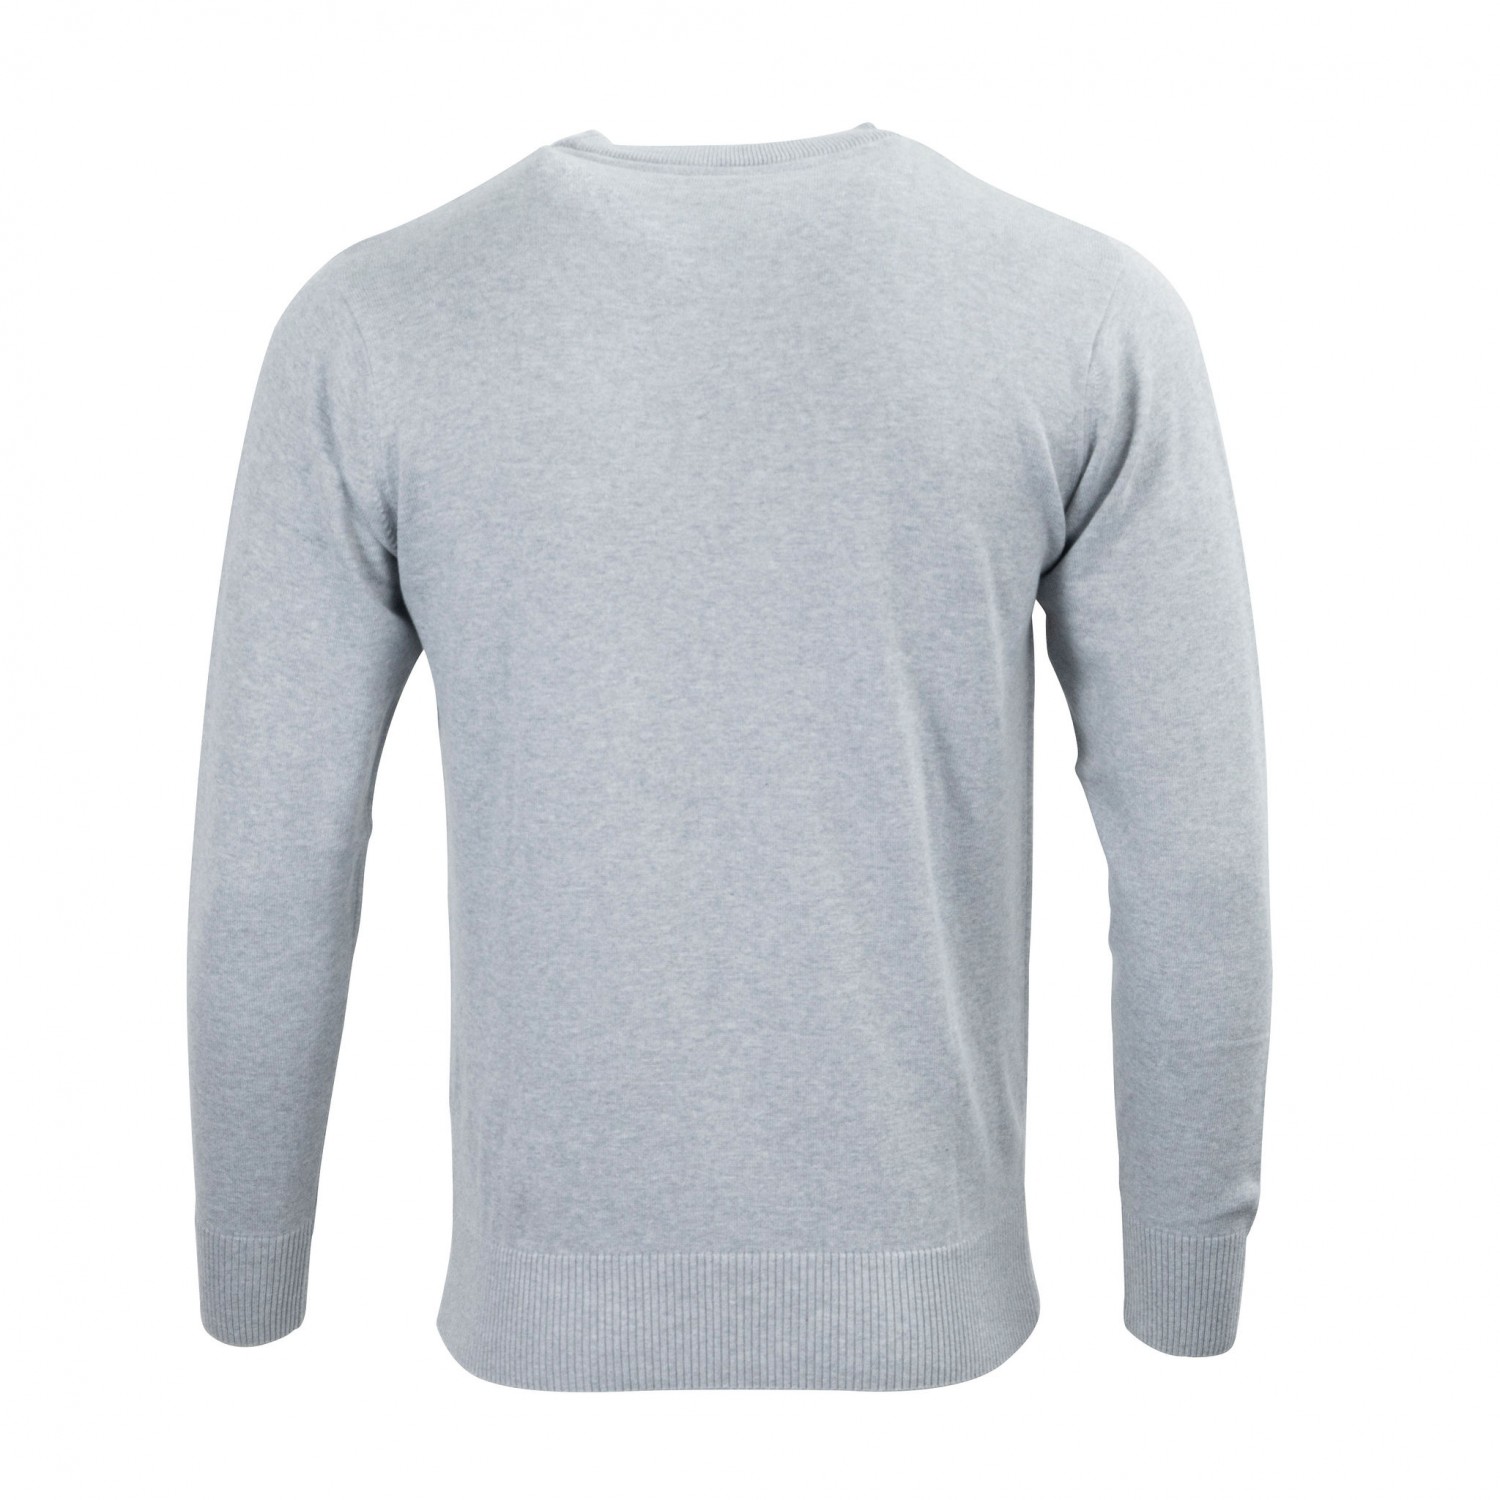 Coventry Grey Knitted Crew Neck Jumper - Adult